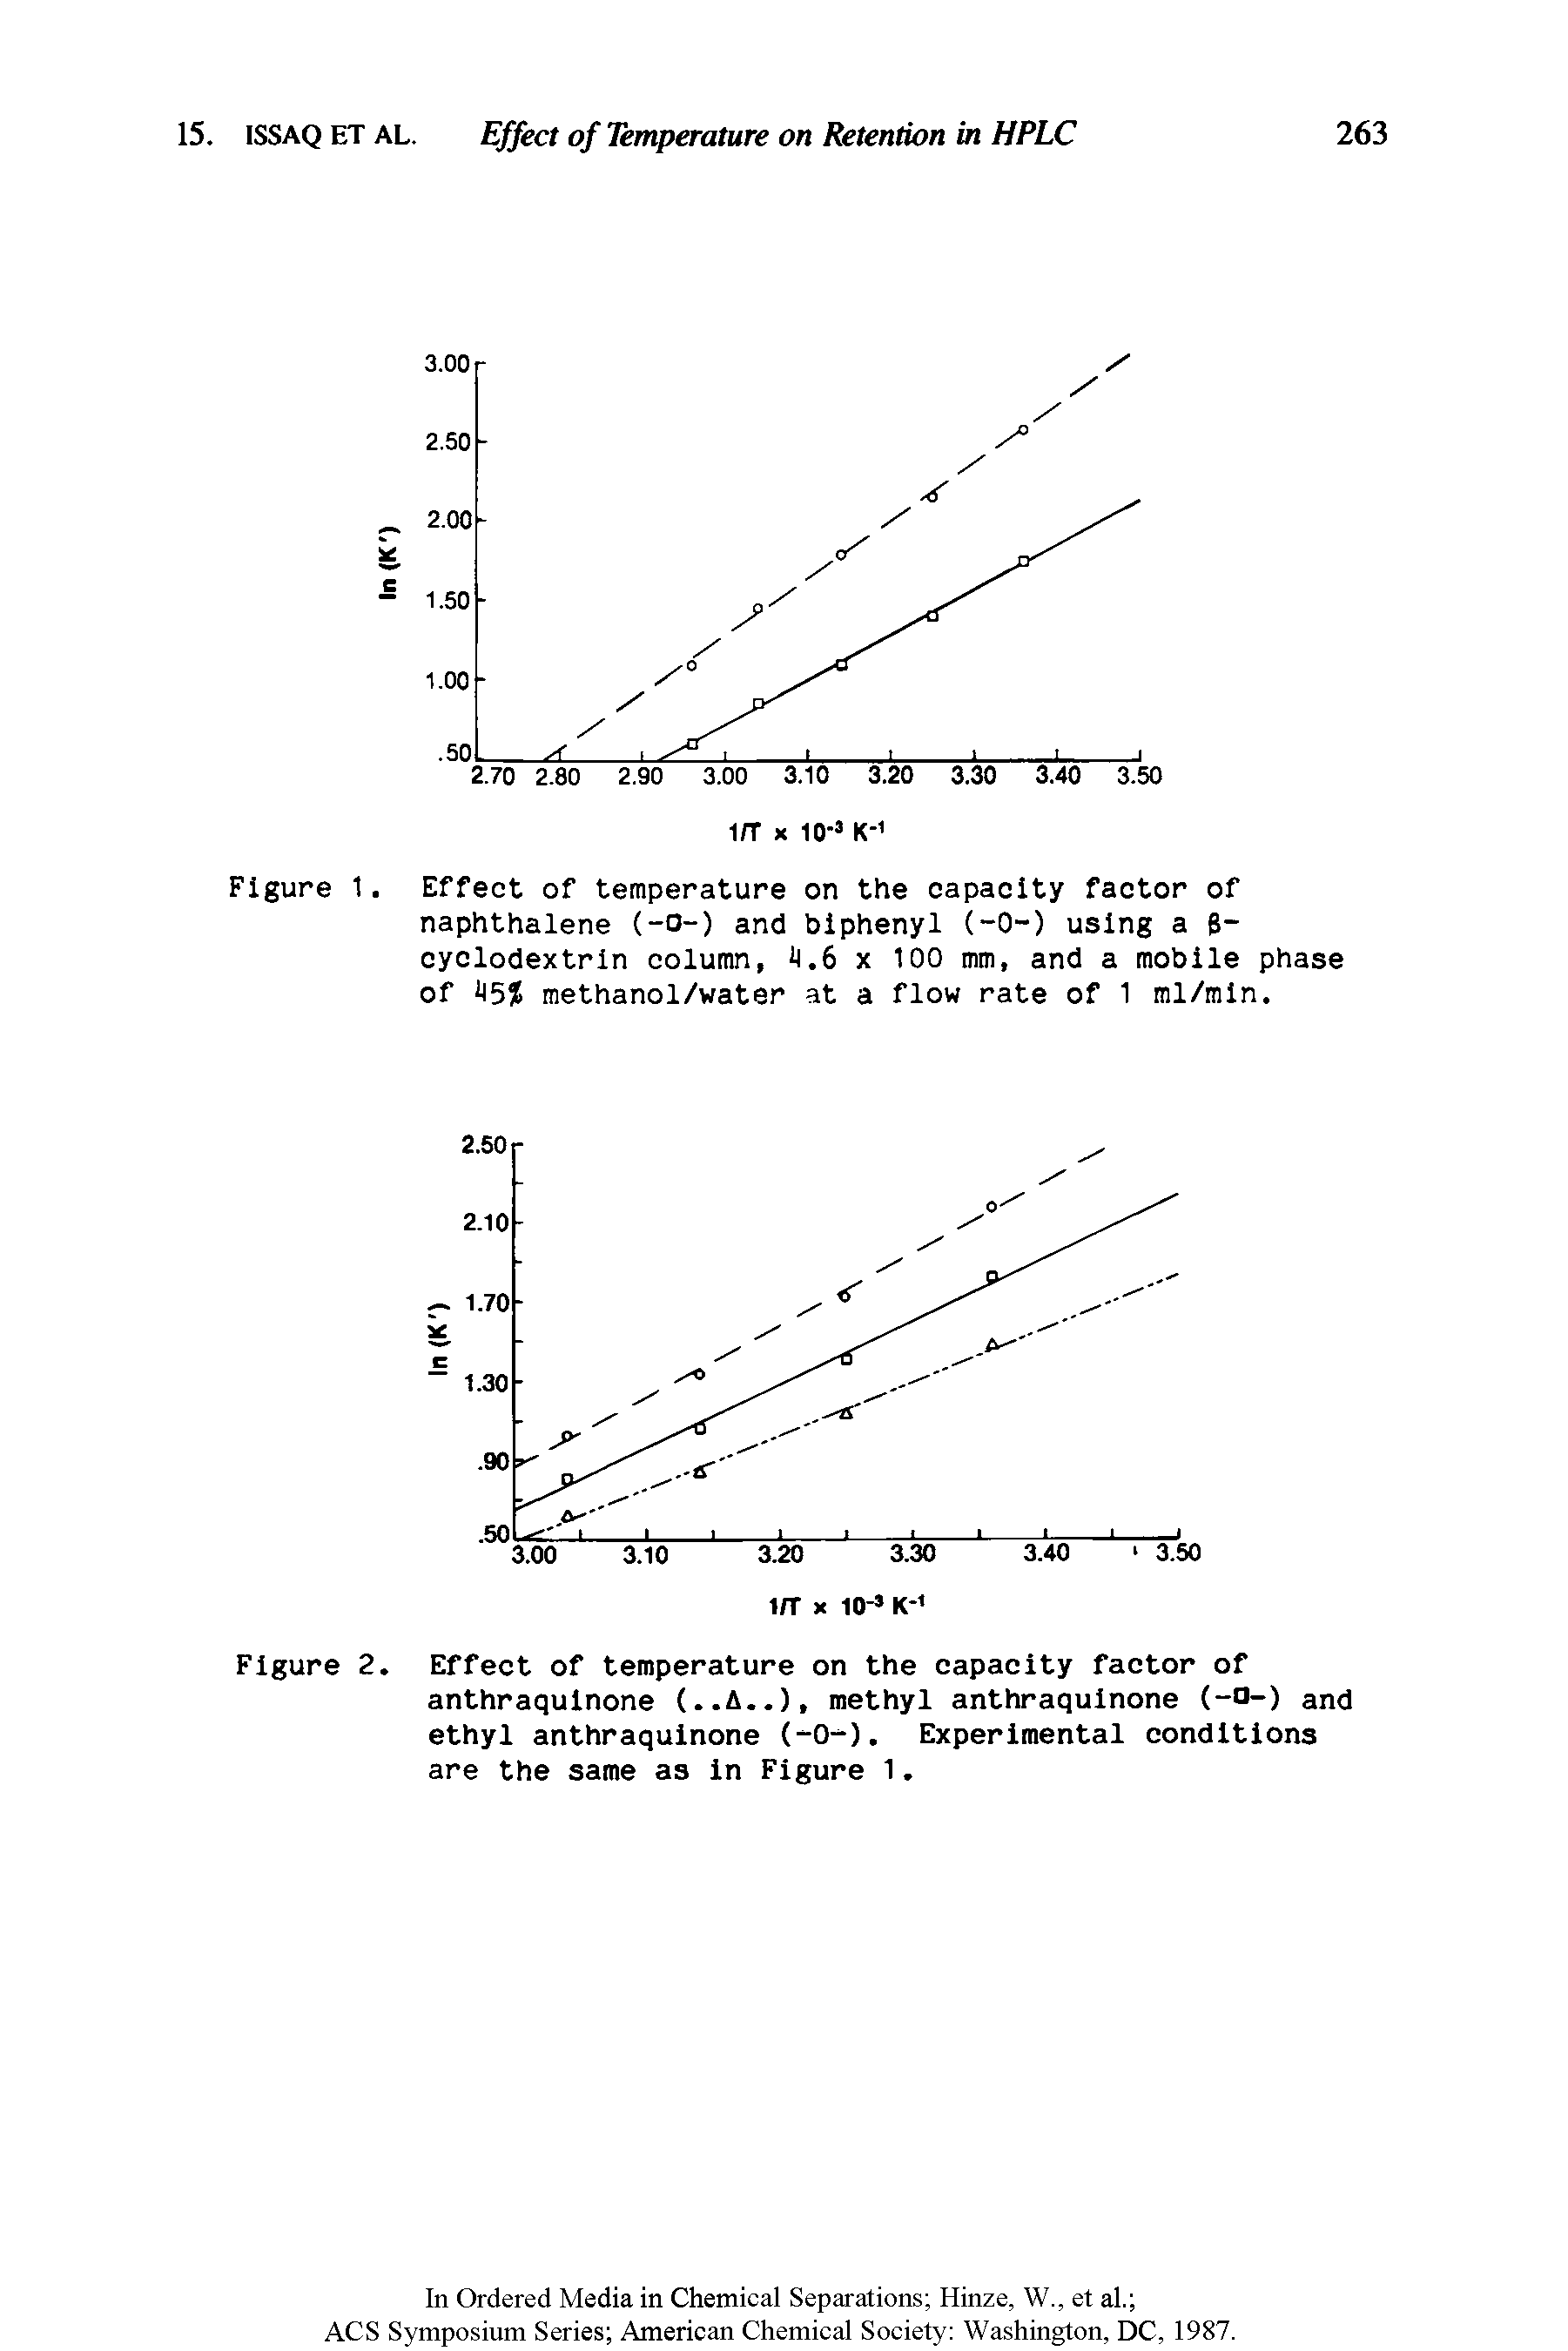 Figure 1. Effect of temperature on the capacity factor of naphthalene (—o—) and biphenyl (-0-) using a 6 cyclodextrin column, ii.6 x 100 mm, and a mobile phase of methanol/water at a flow rate of 1 ml/min.